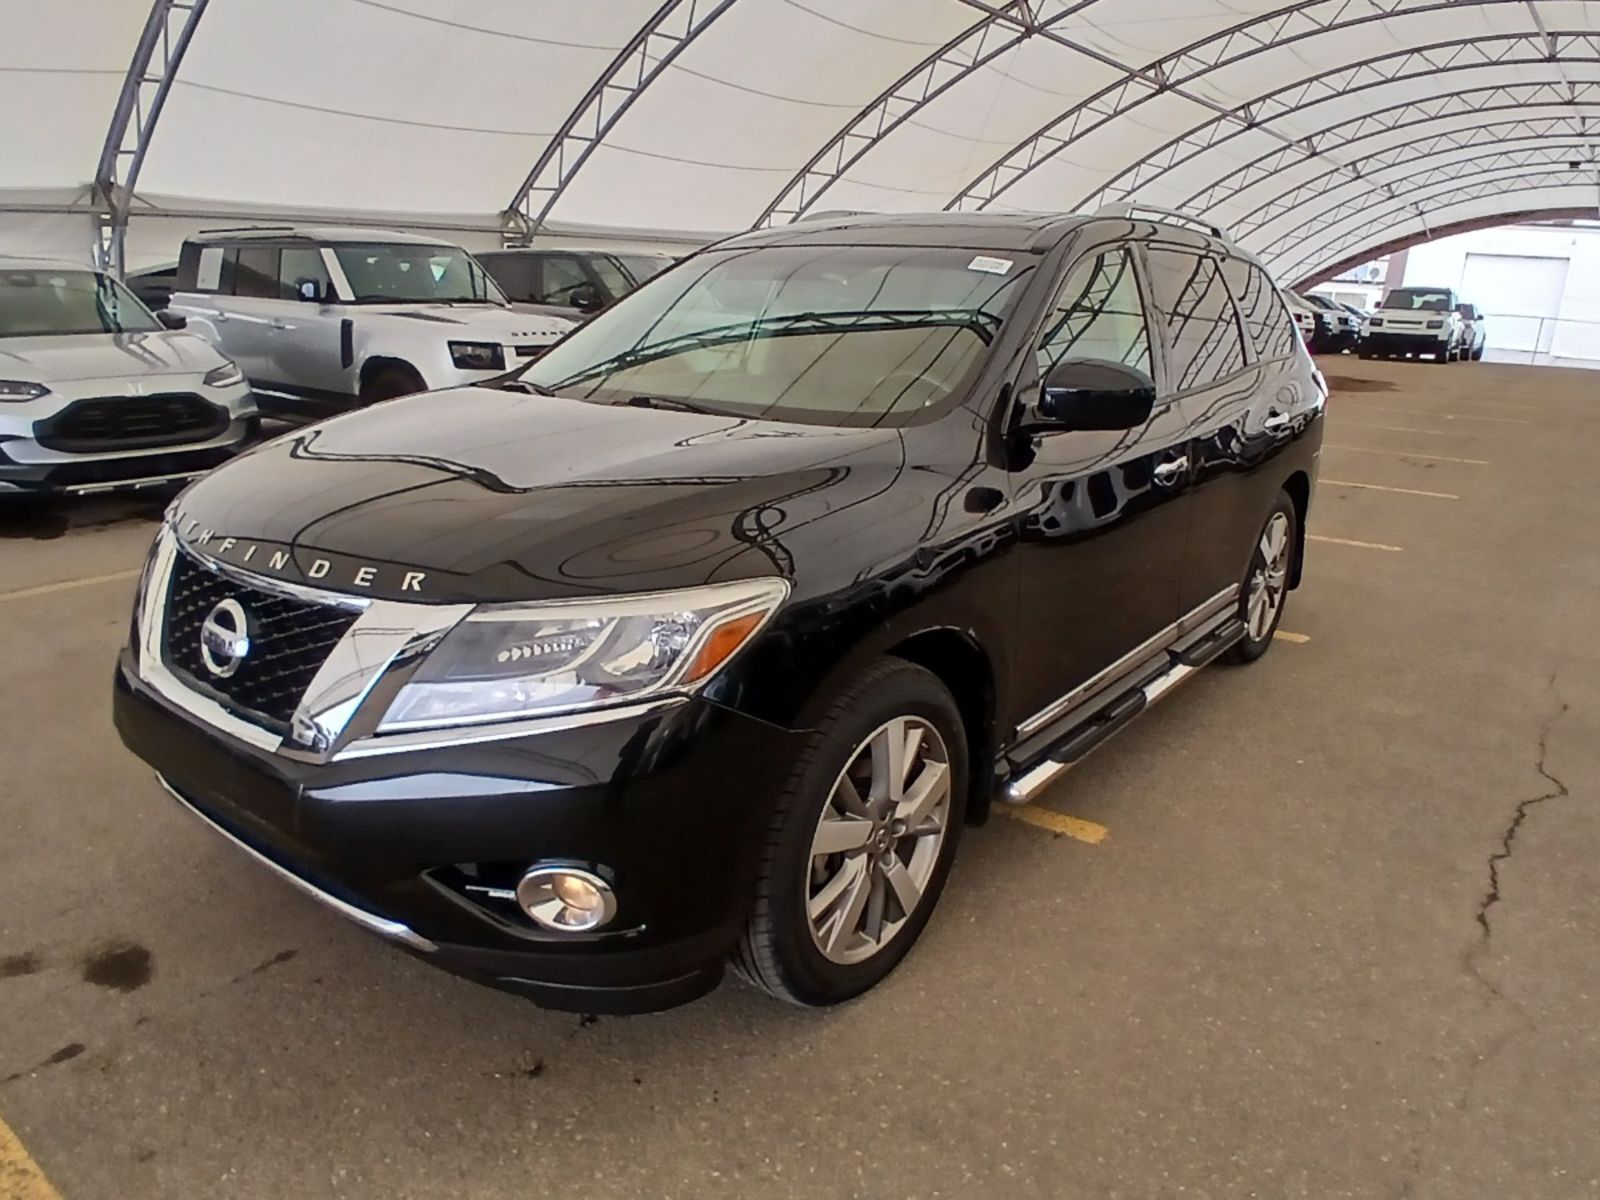 2016 Nissan Pathfinder S - 4WD, Low Km's for age